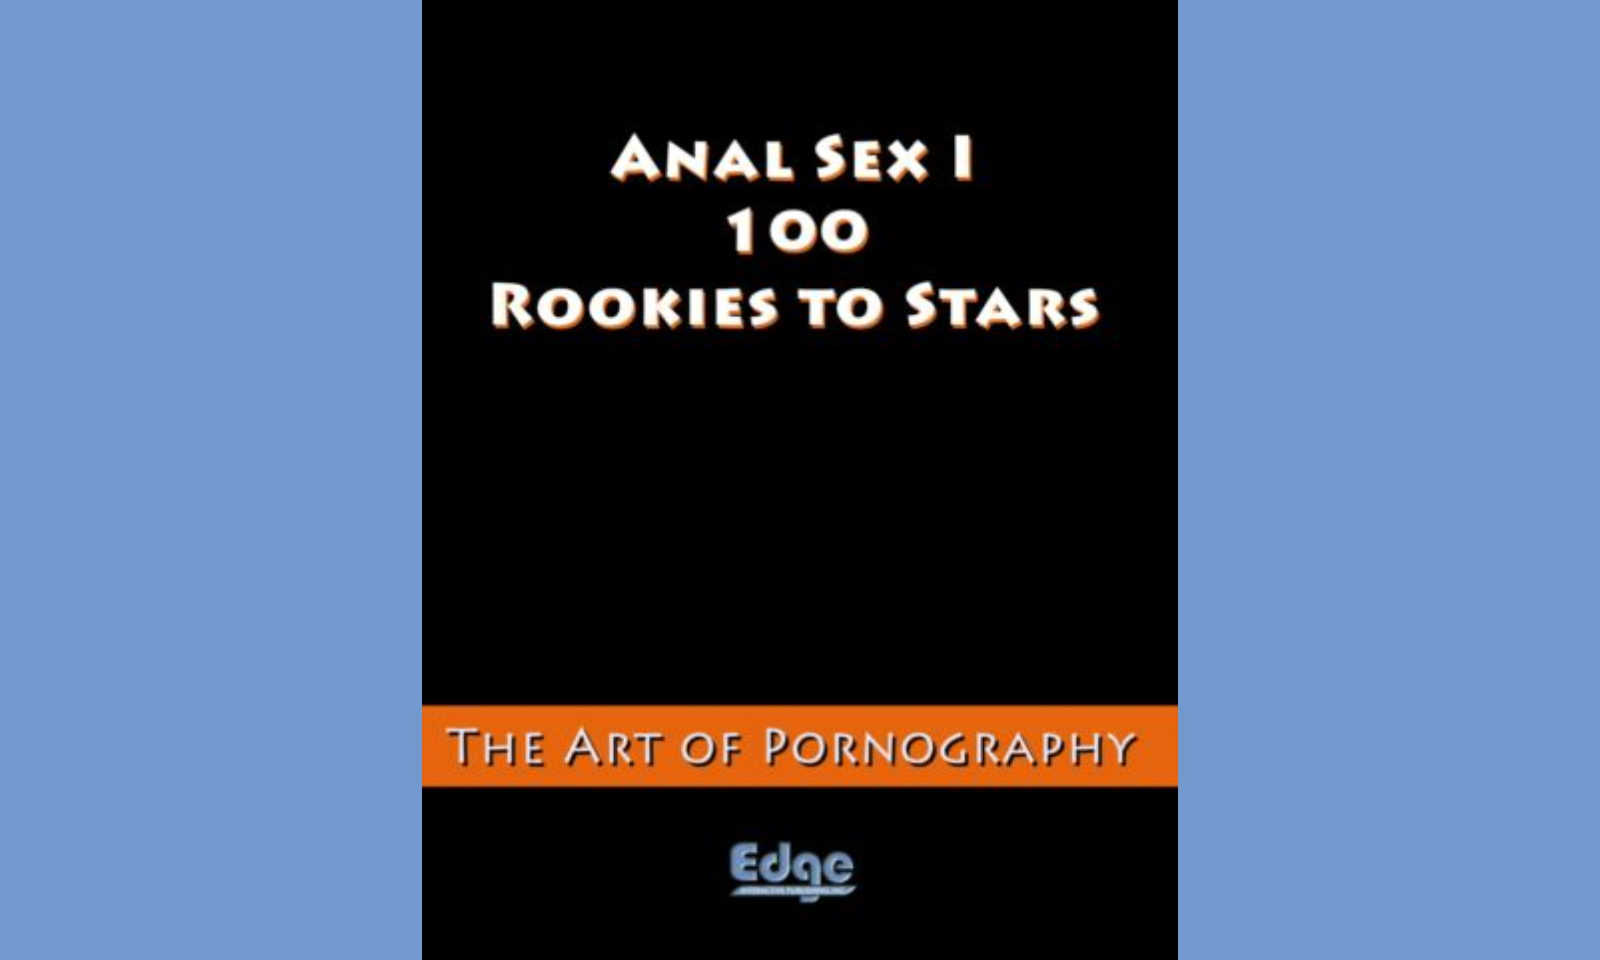 Edge Interactive Releases 'Art of Pornography' Book on Anal Sex